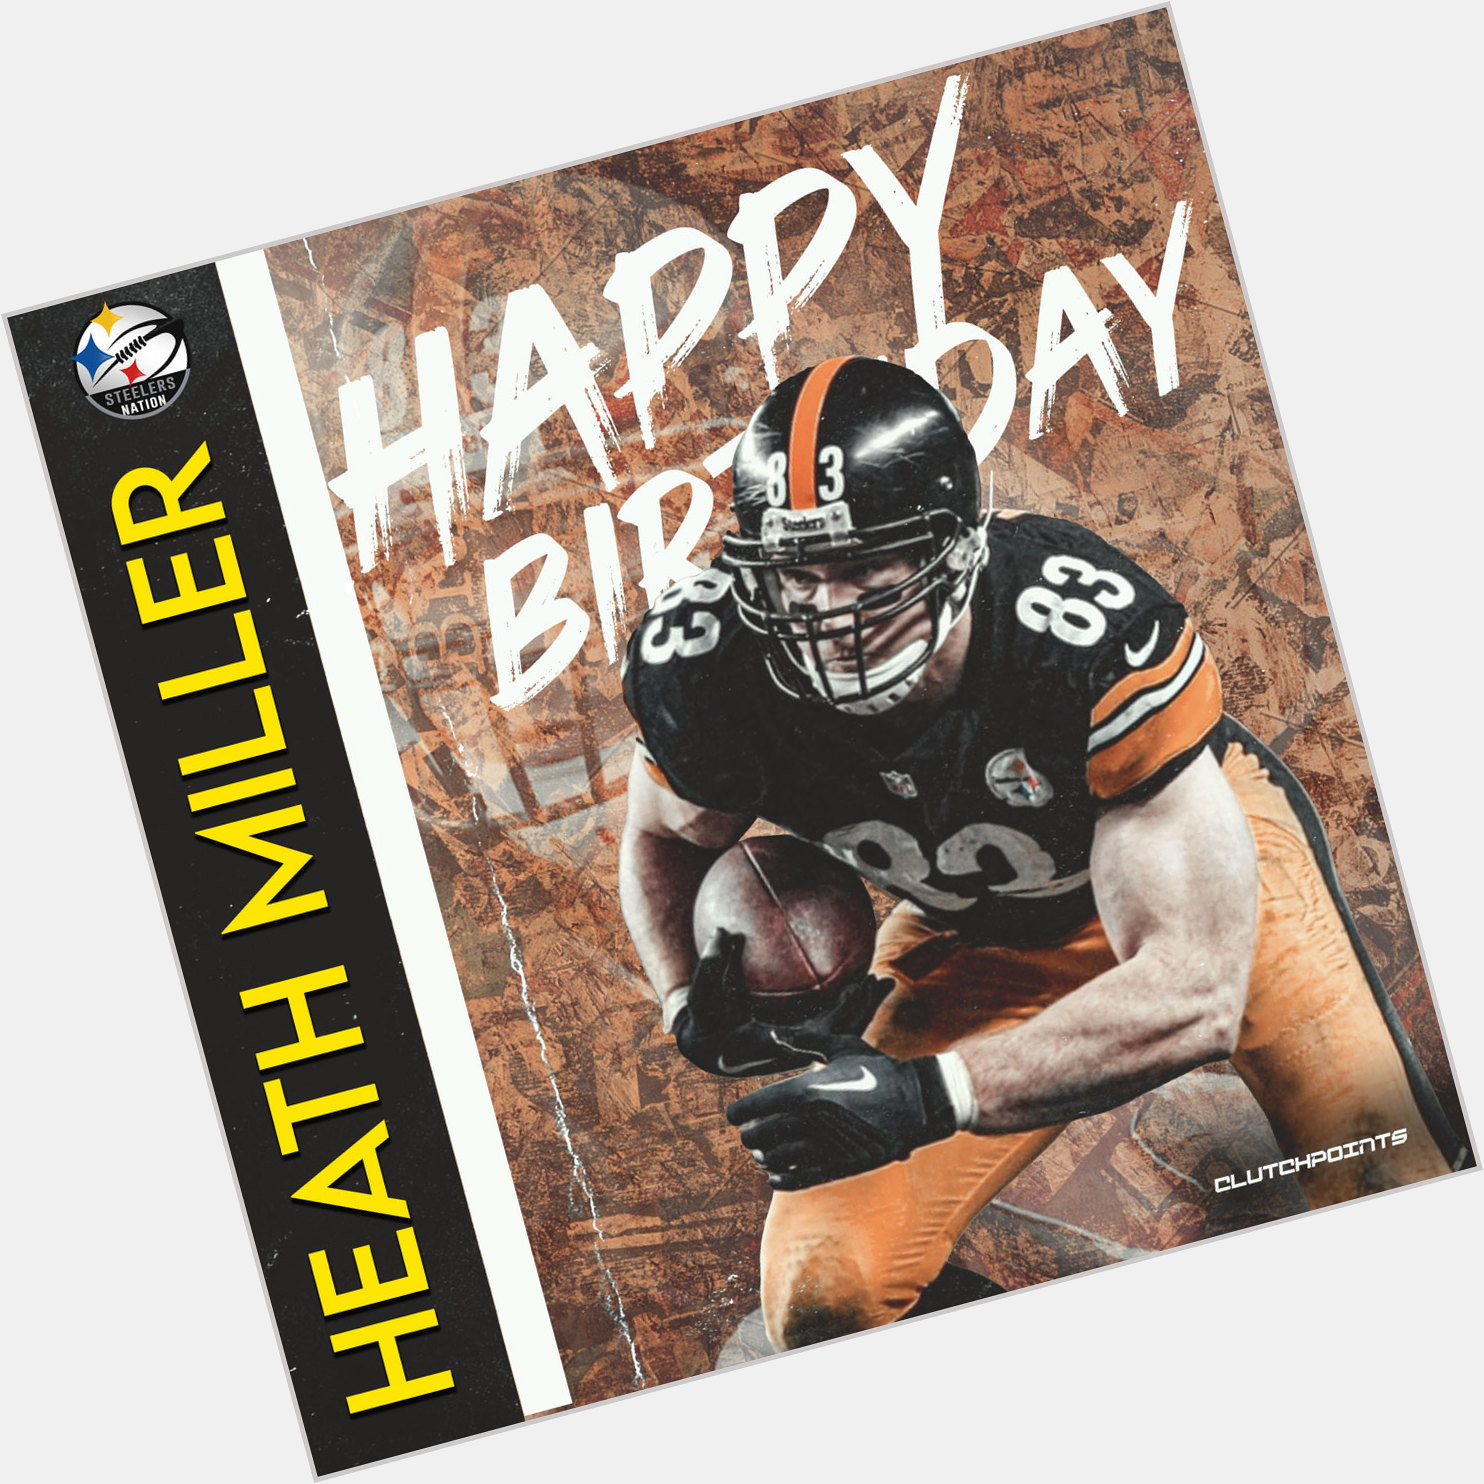 Join Steelers Nation in greeting 2X Super Bowl Champion and 2X Pro Bowler Heath Miller a happy 39th birthday!  